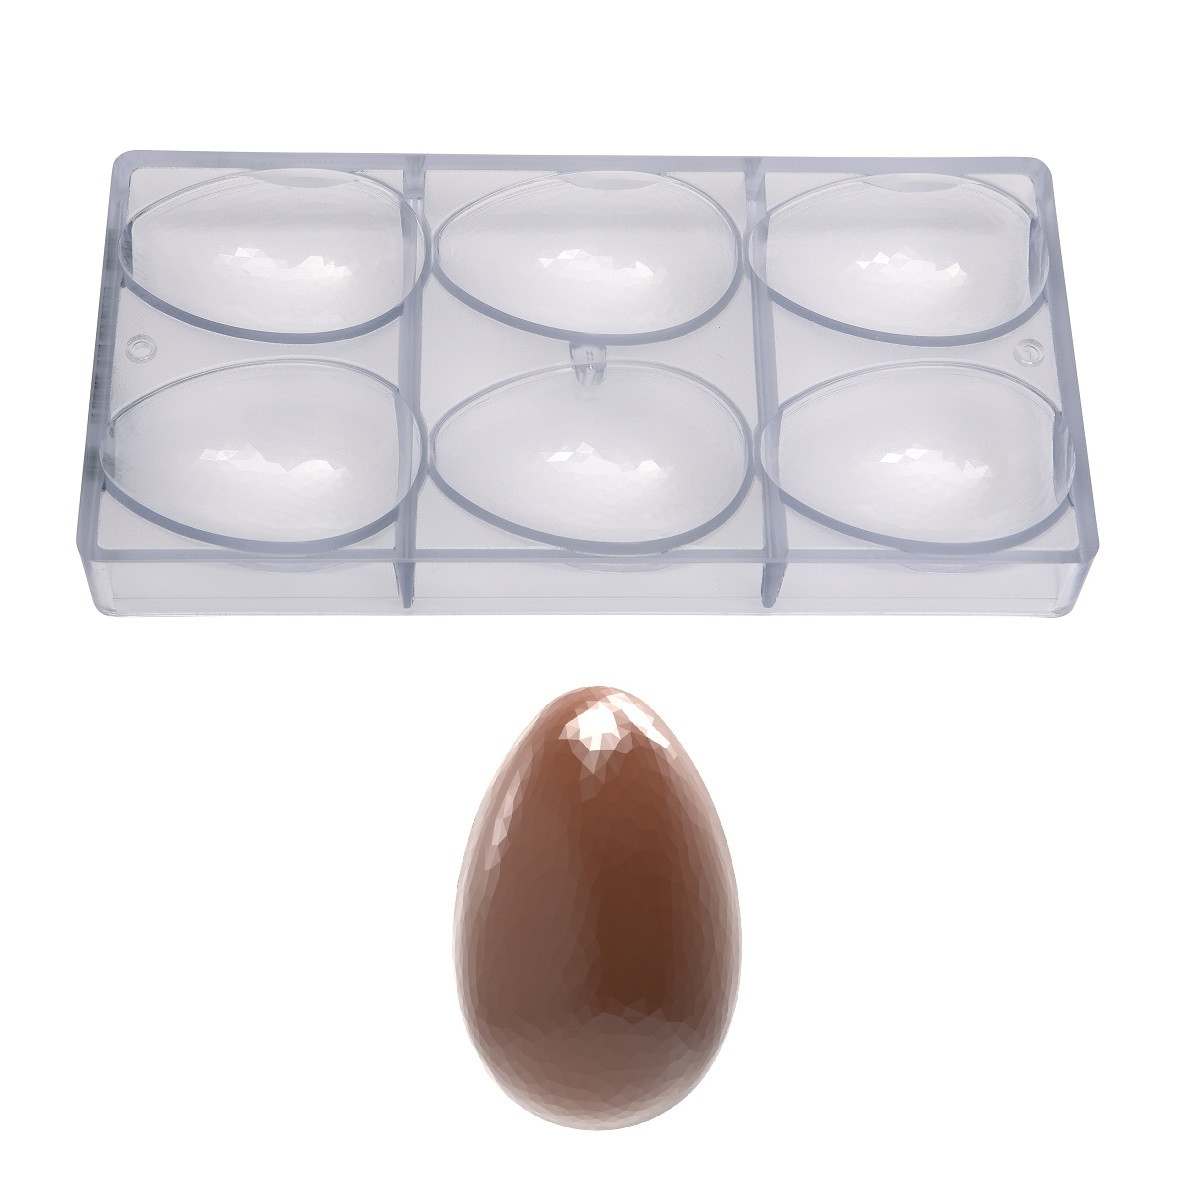 Chocolate Hollow Mold Chocolate World Egg Facet (6x) 86x56x30mm